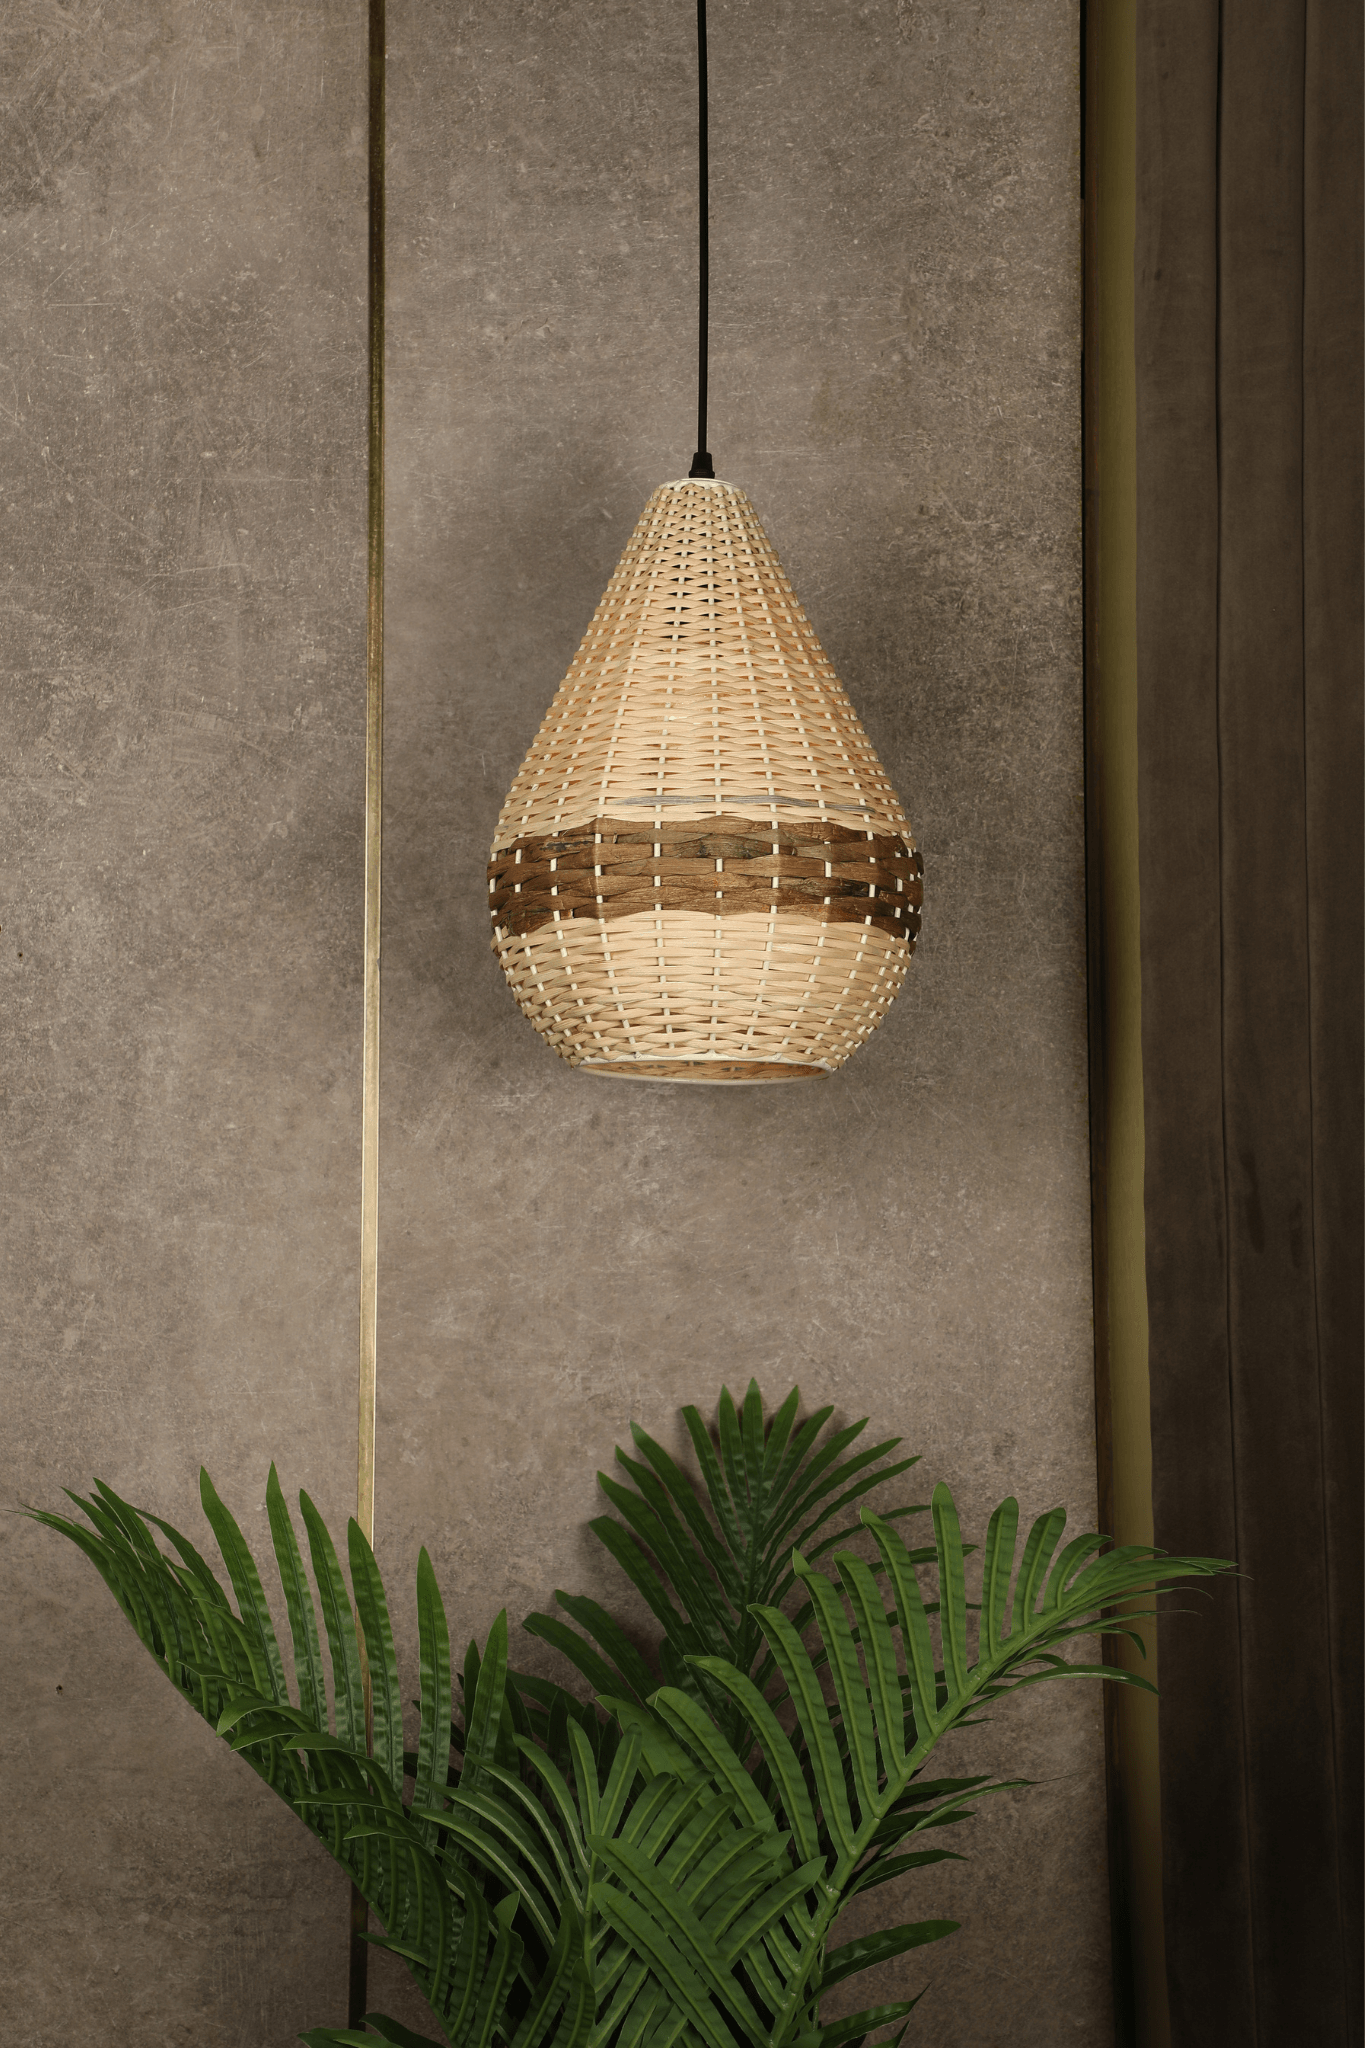 Velsa Handcrafted Pendant Light by The Light Library